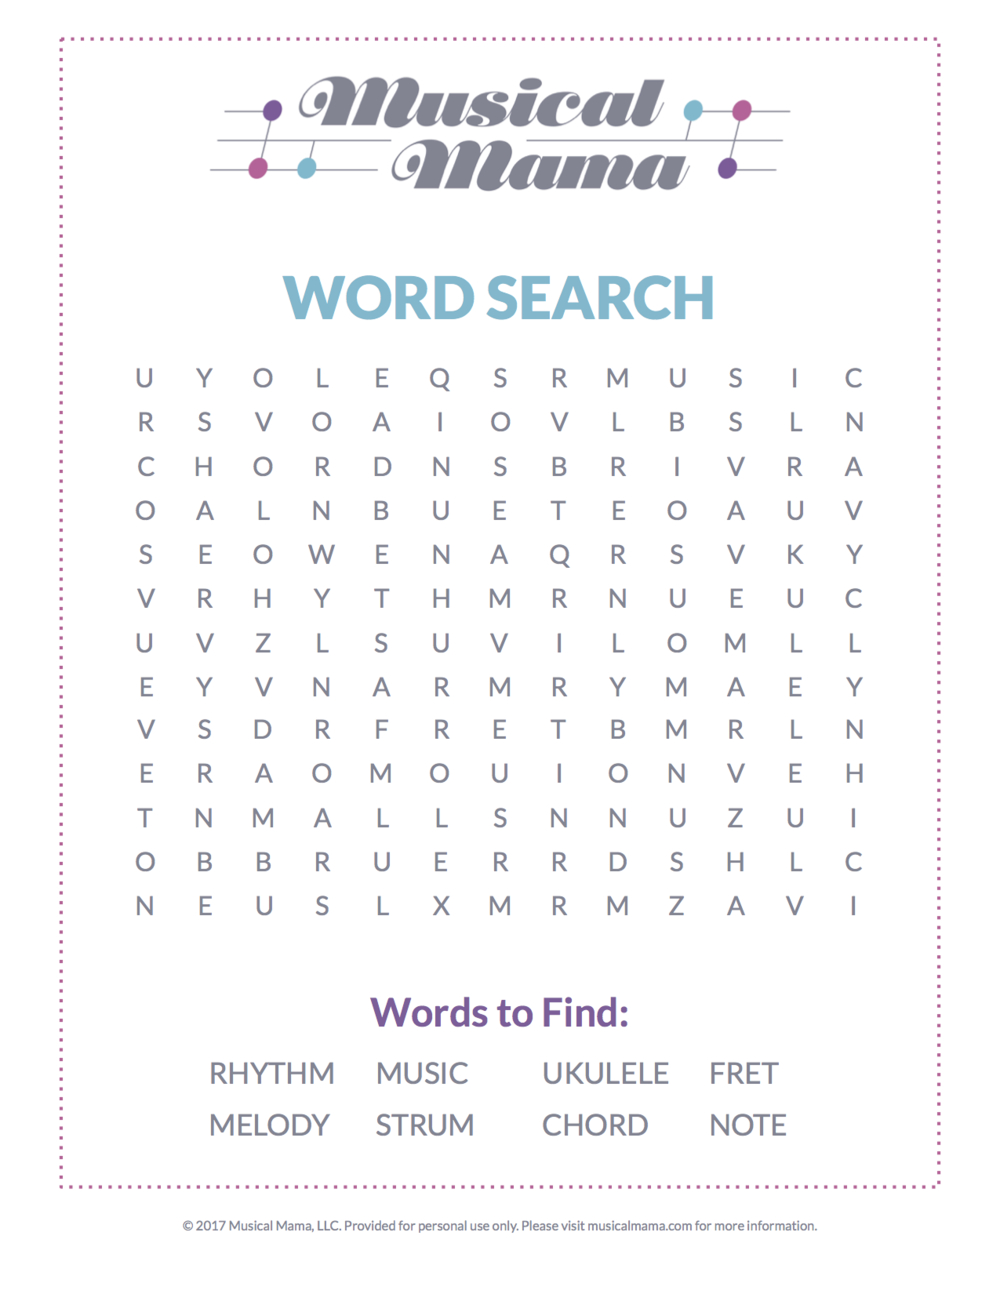 Free Printable: A Music-Themed Word Search — Musical Mama